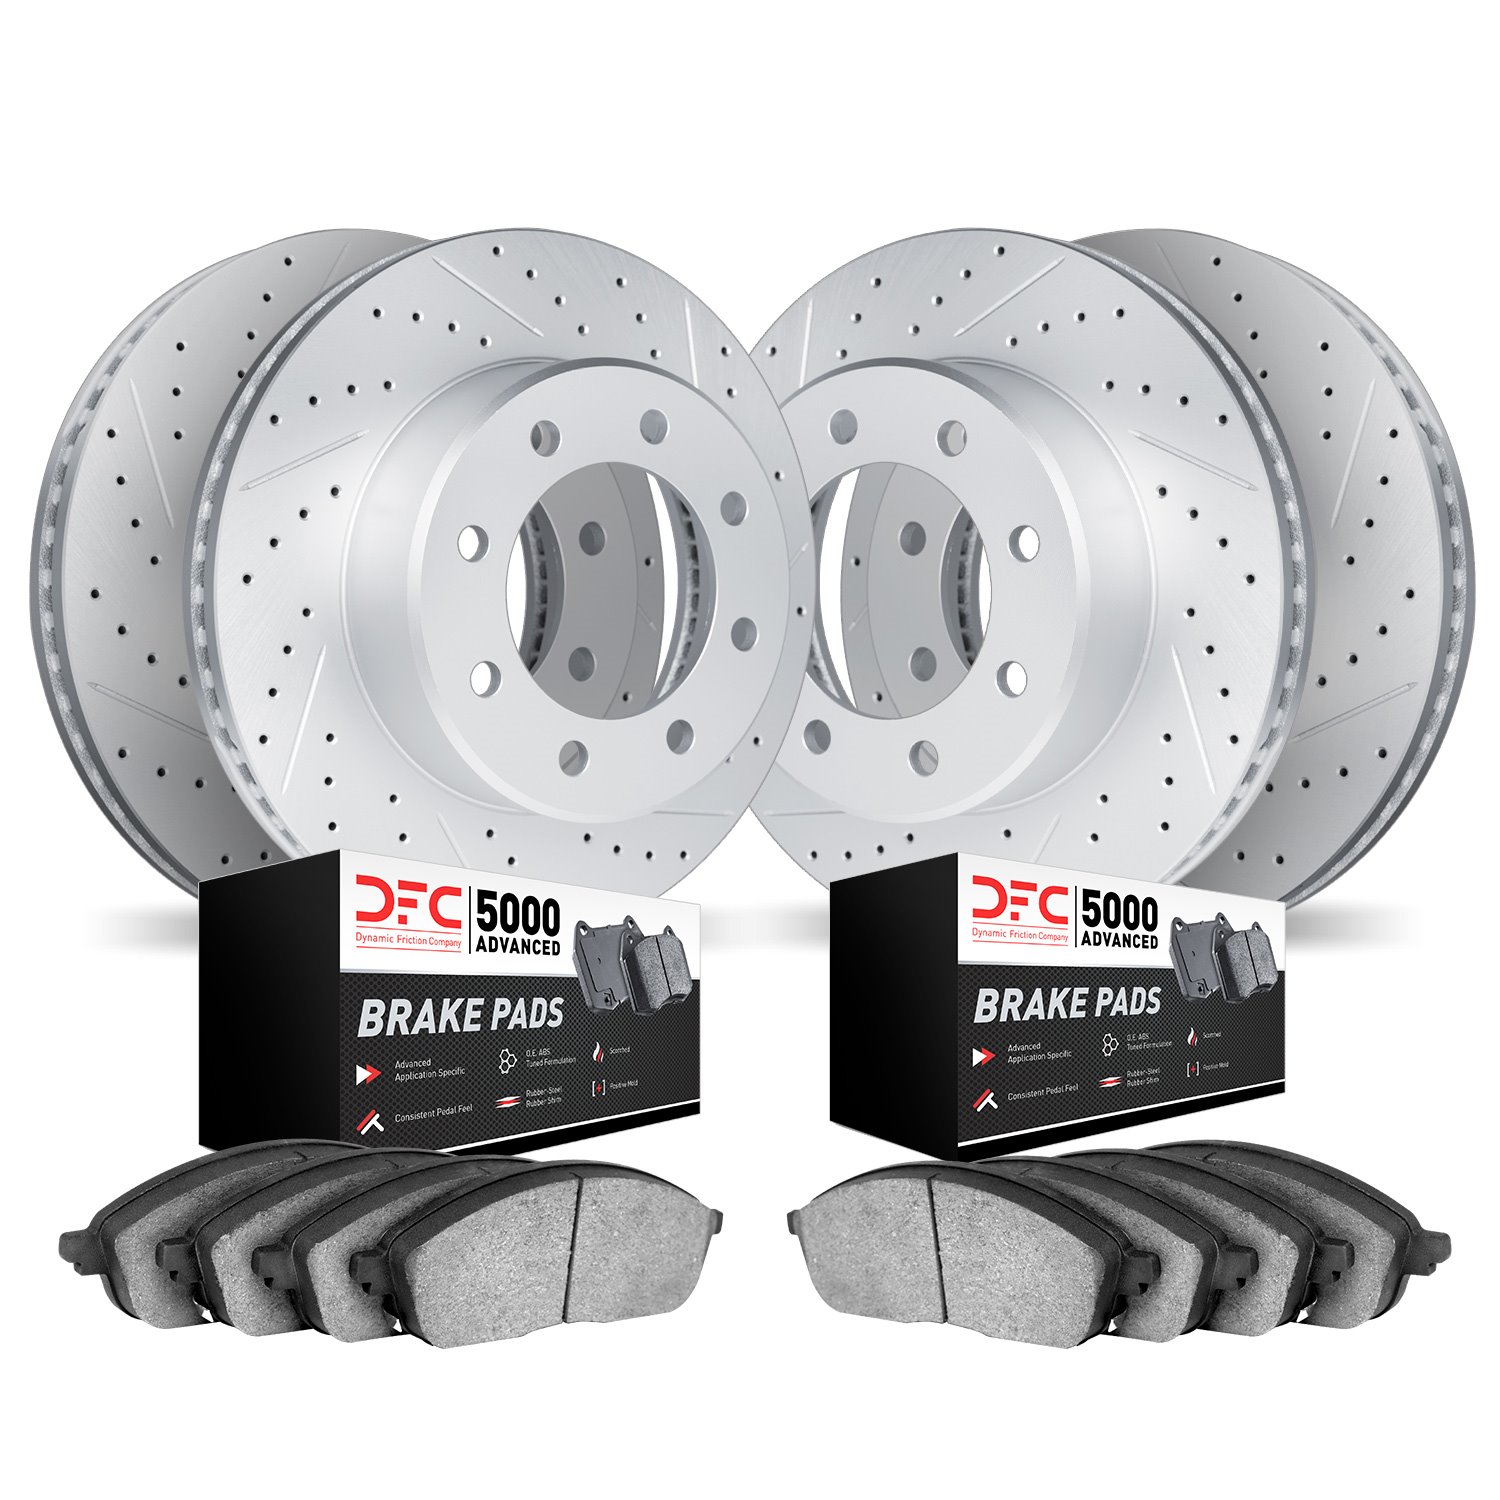 2504-54278 Geoperformance Drilled/Slotted Rotors w/5000 Advanced Brake Pads Kit, 2010-2011 Ford/Lincoln/Mercury/Mazda, Position: